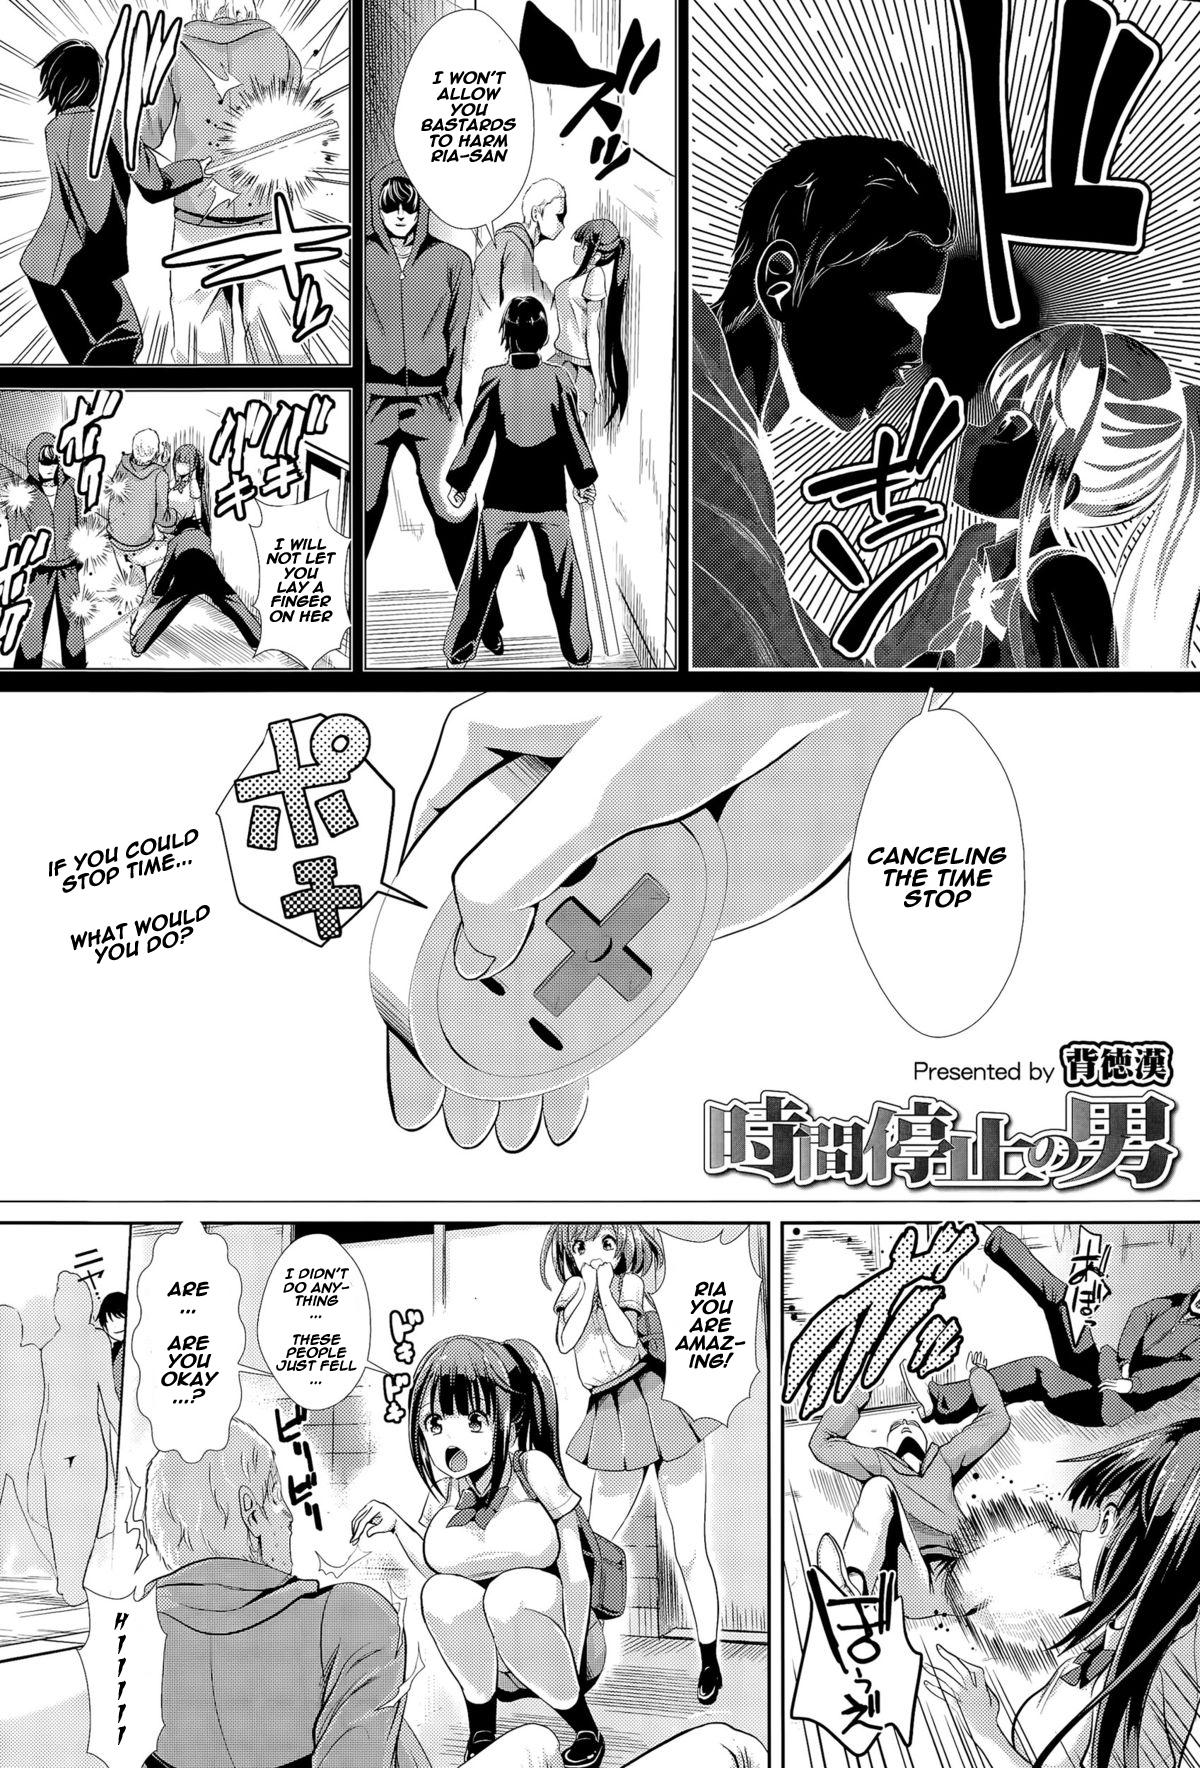 Fuck For Money Jikan Teishi no Otoko | The journal of the man who could stop time Tight - Page 2